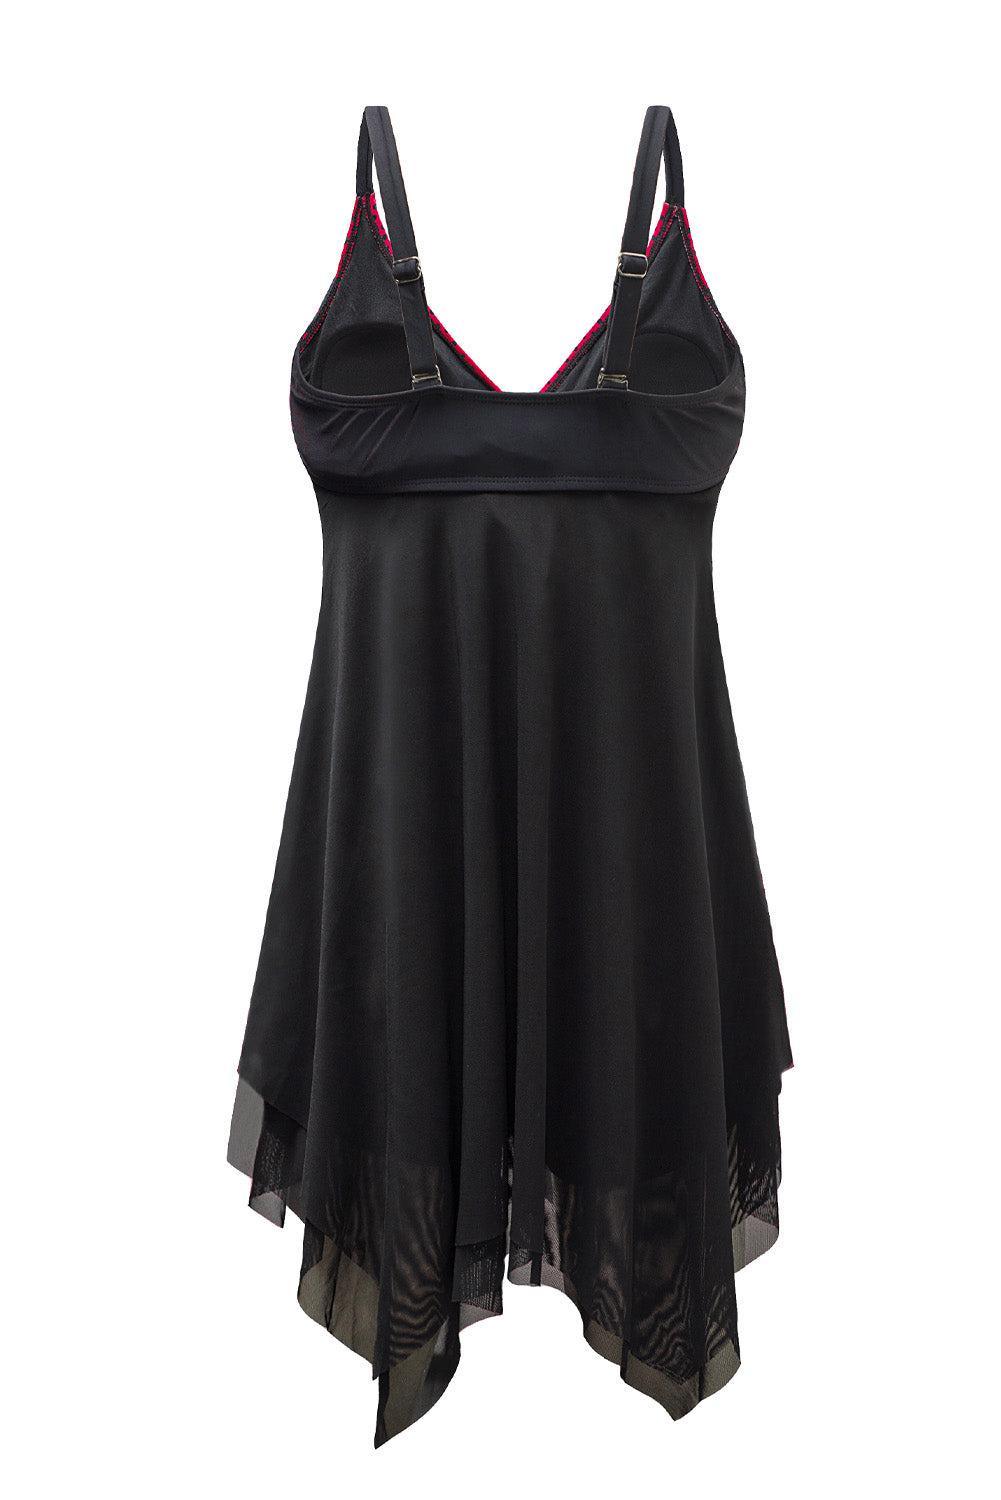 a women's black tank top with red trim